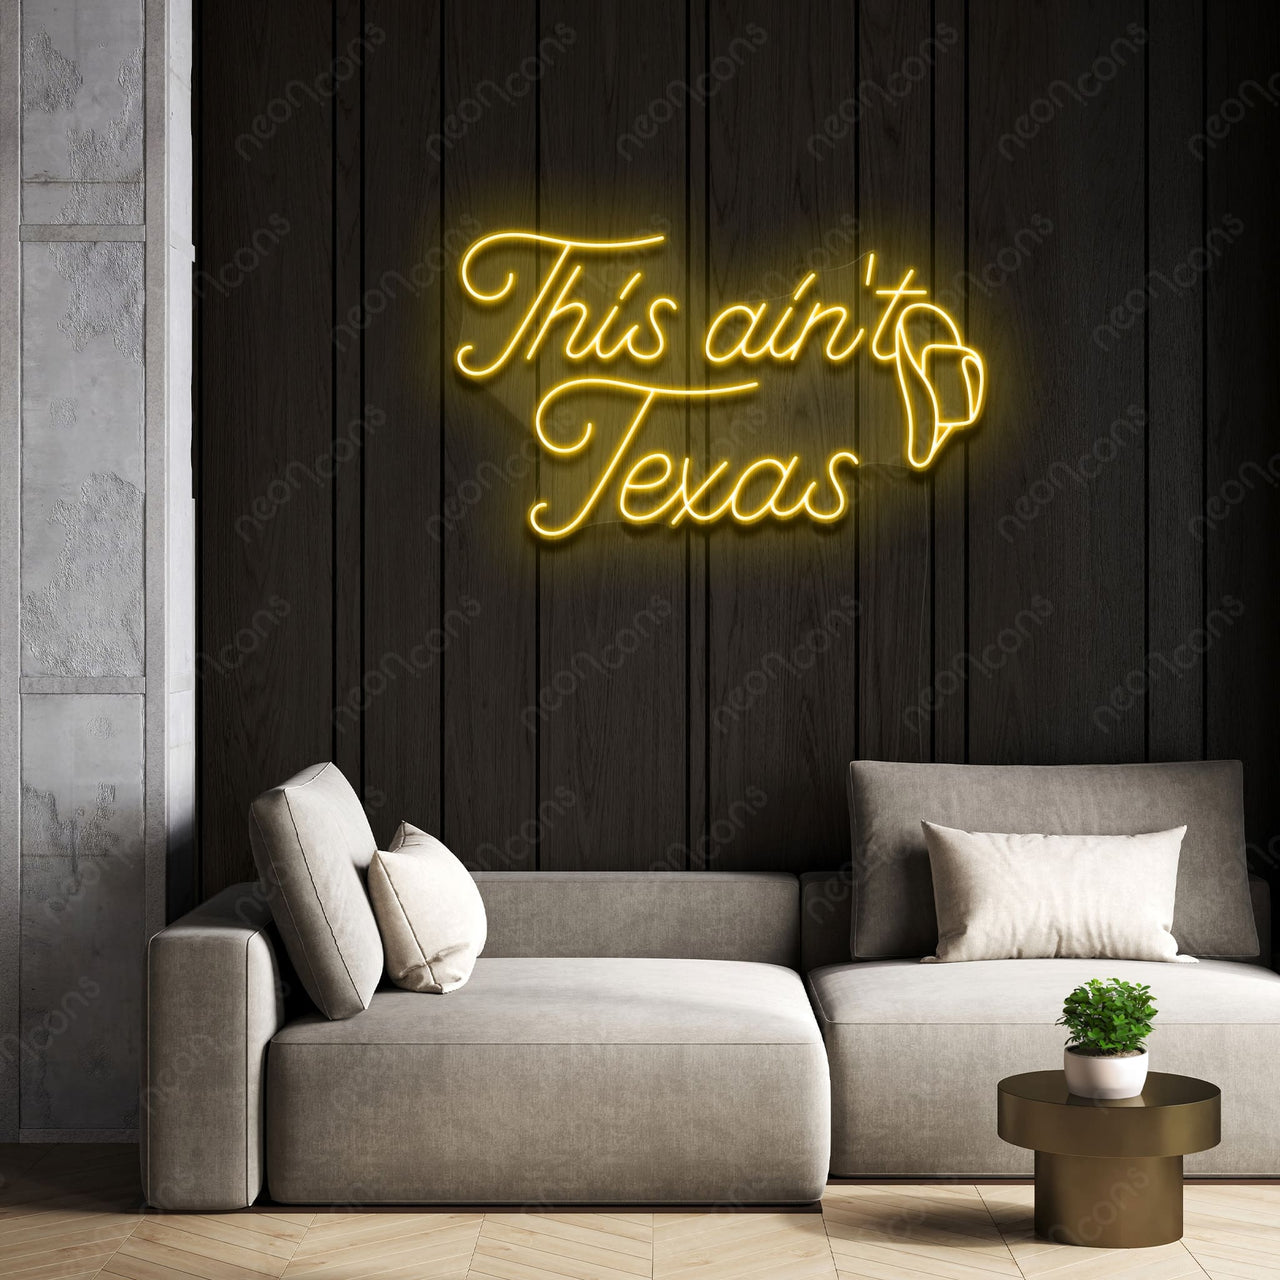 "This Ain't Texas" Neon Sign by Neon Icons